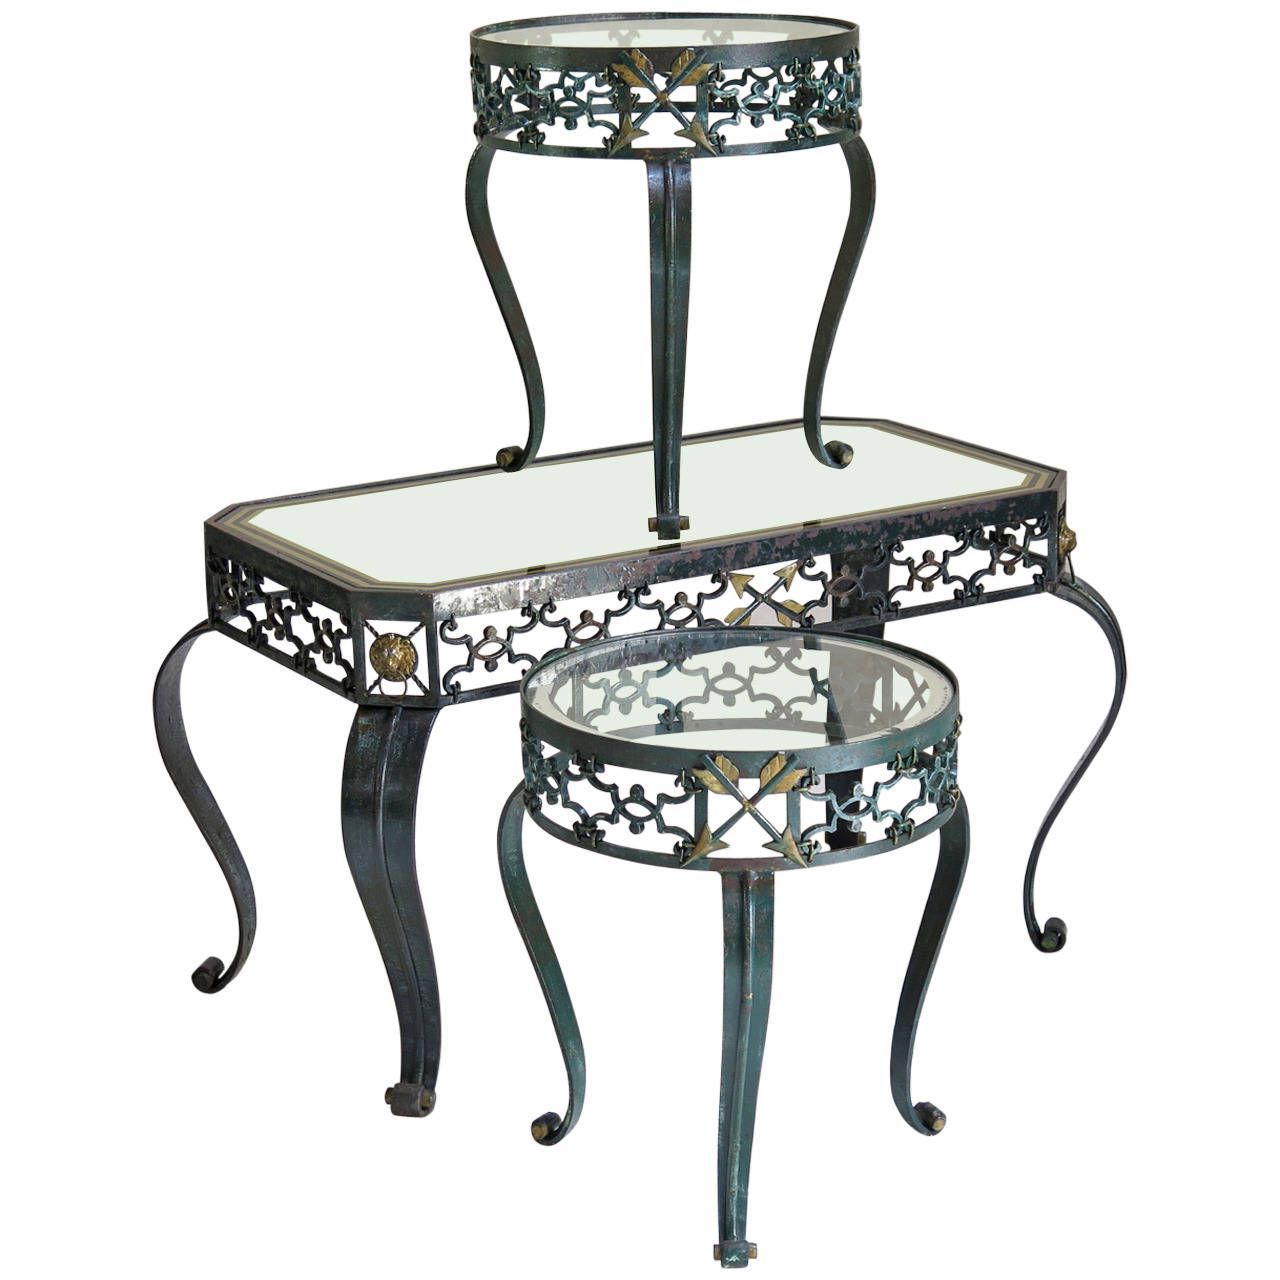 Trio Of Art Deco Wrought Iron Coffee Tables, France, 1940s Intended For Well Known Wrought Iron Cocktail Tables (Gallery 4 of 20)